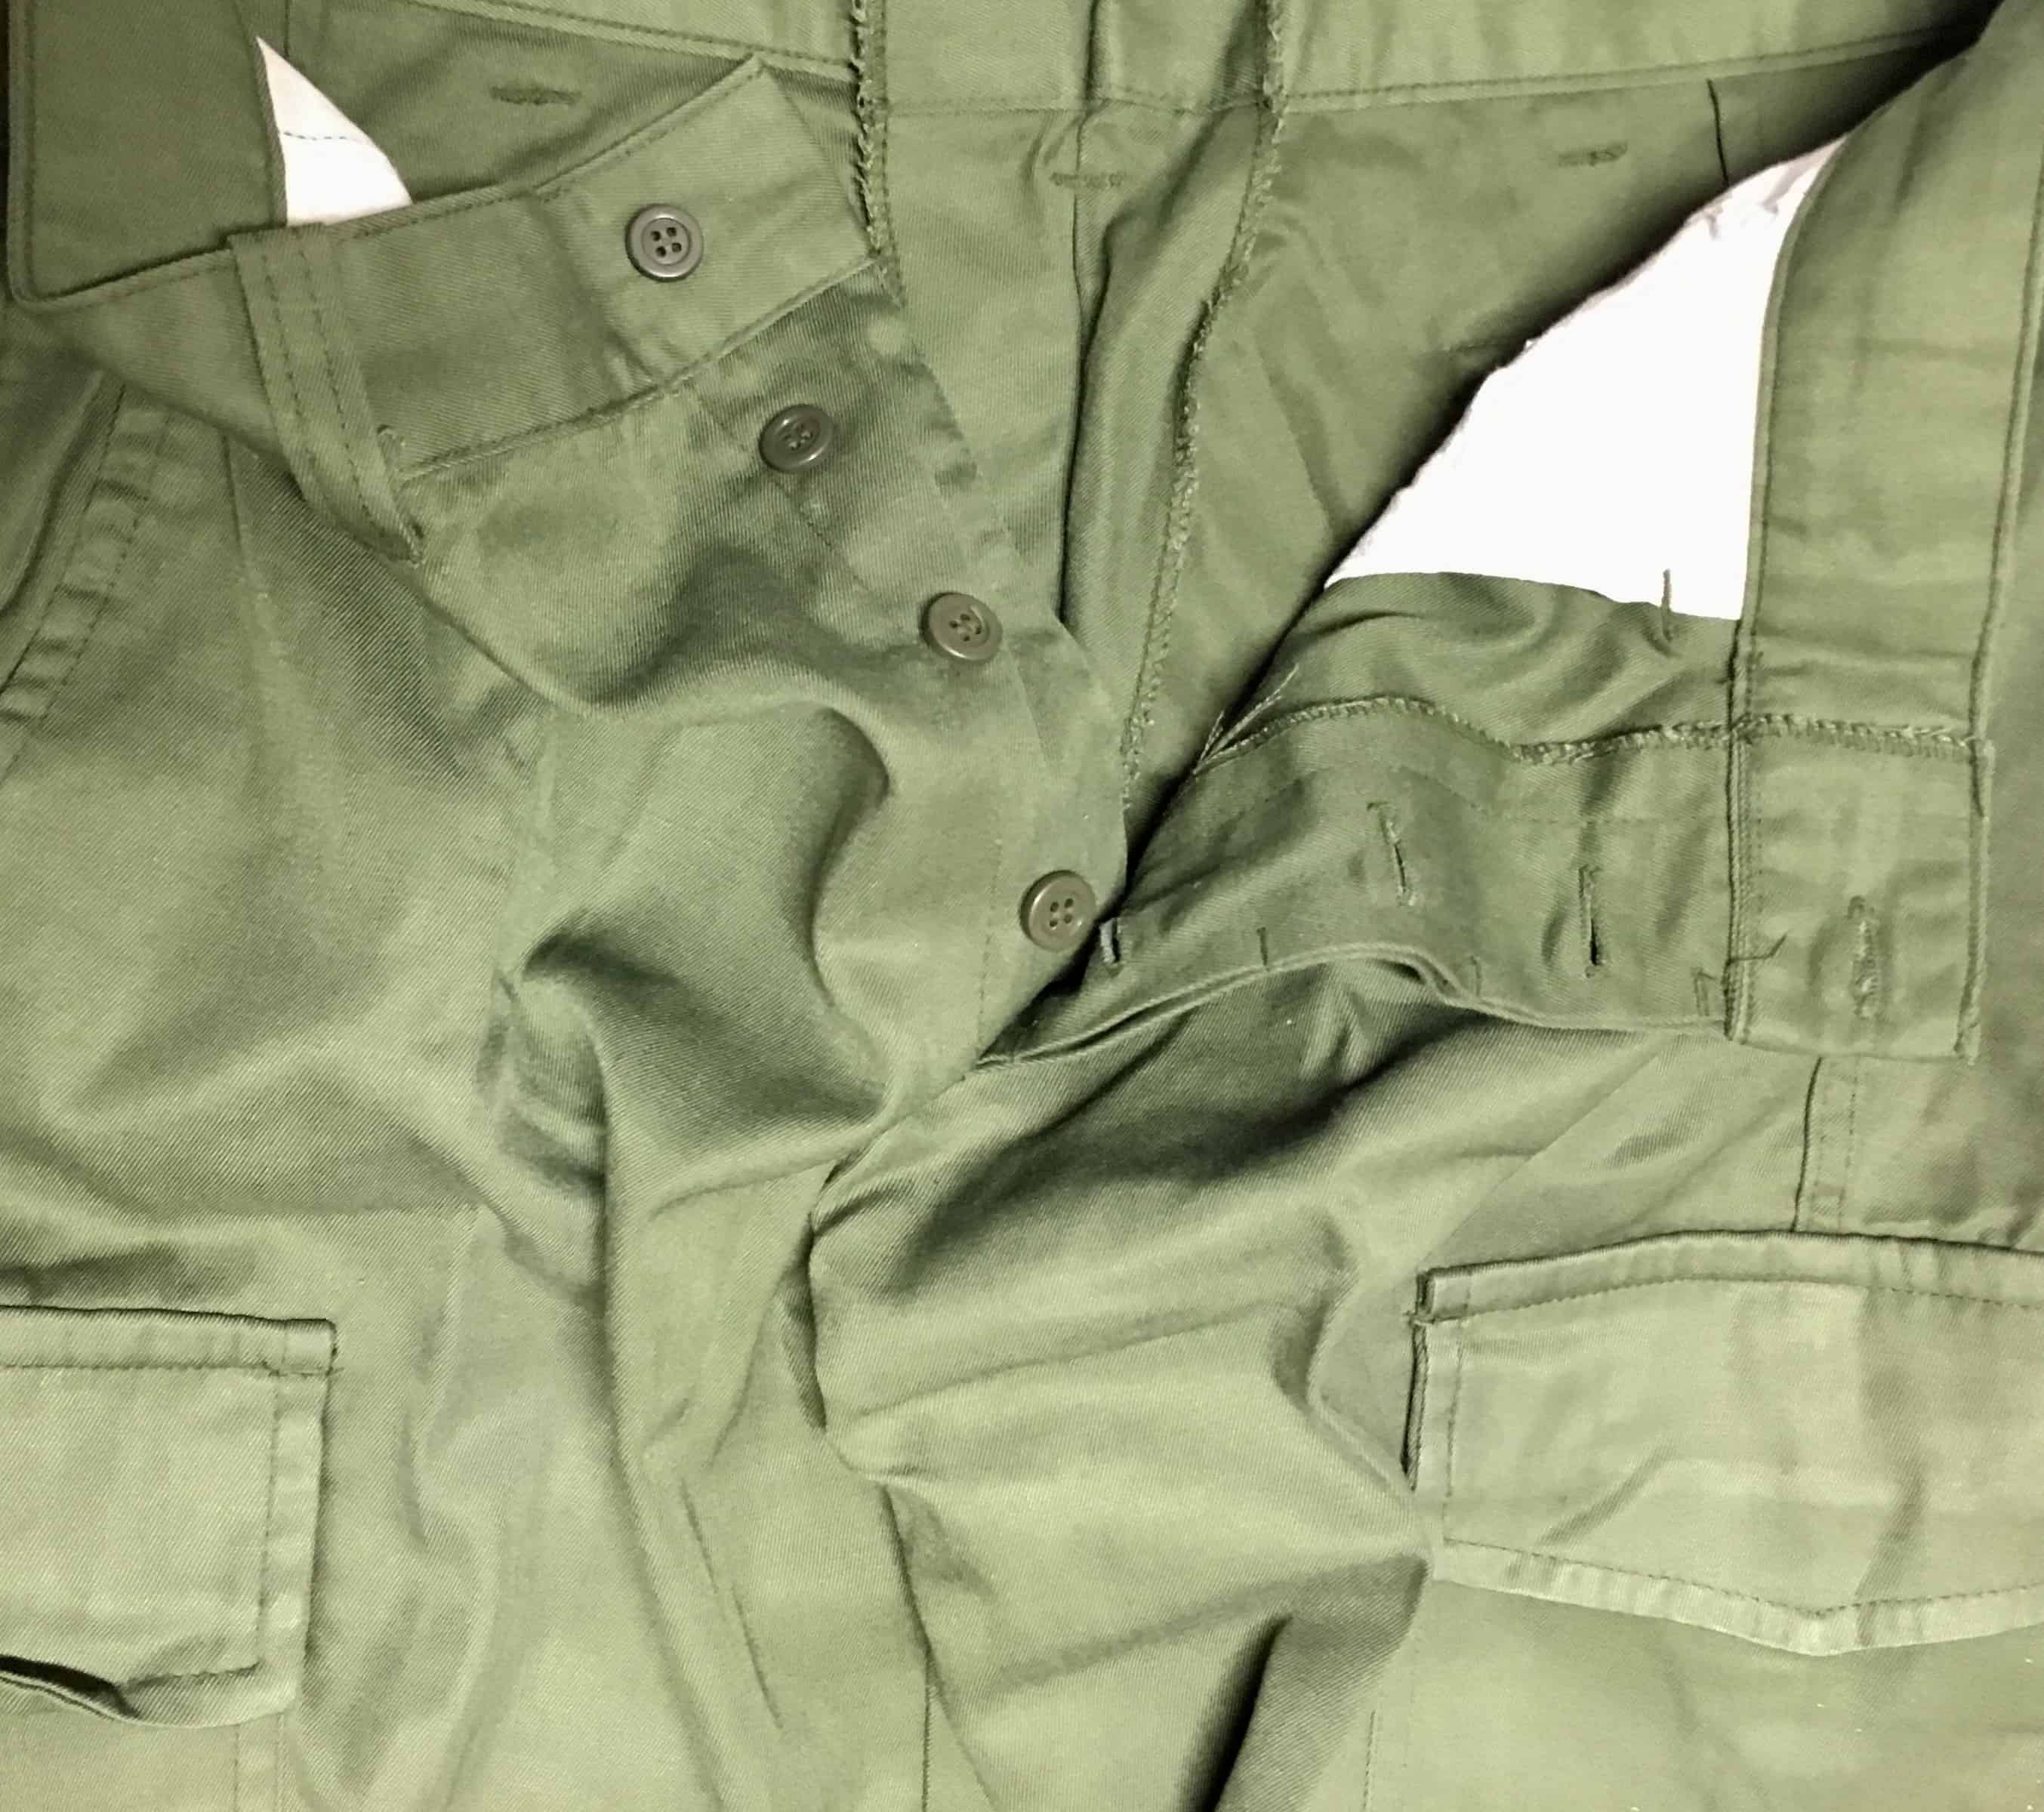 Cuban Field Jacket with FAR - CUBA Tape and Trousers - Enemy Militaria